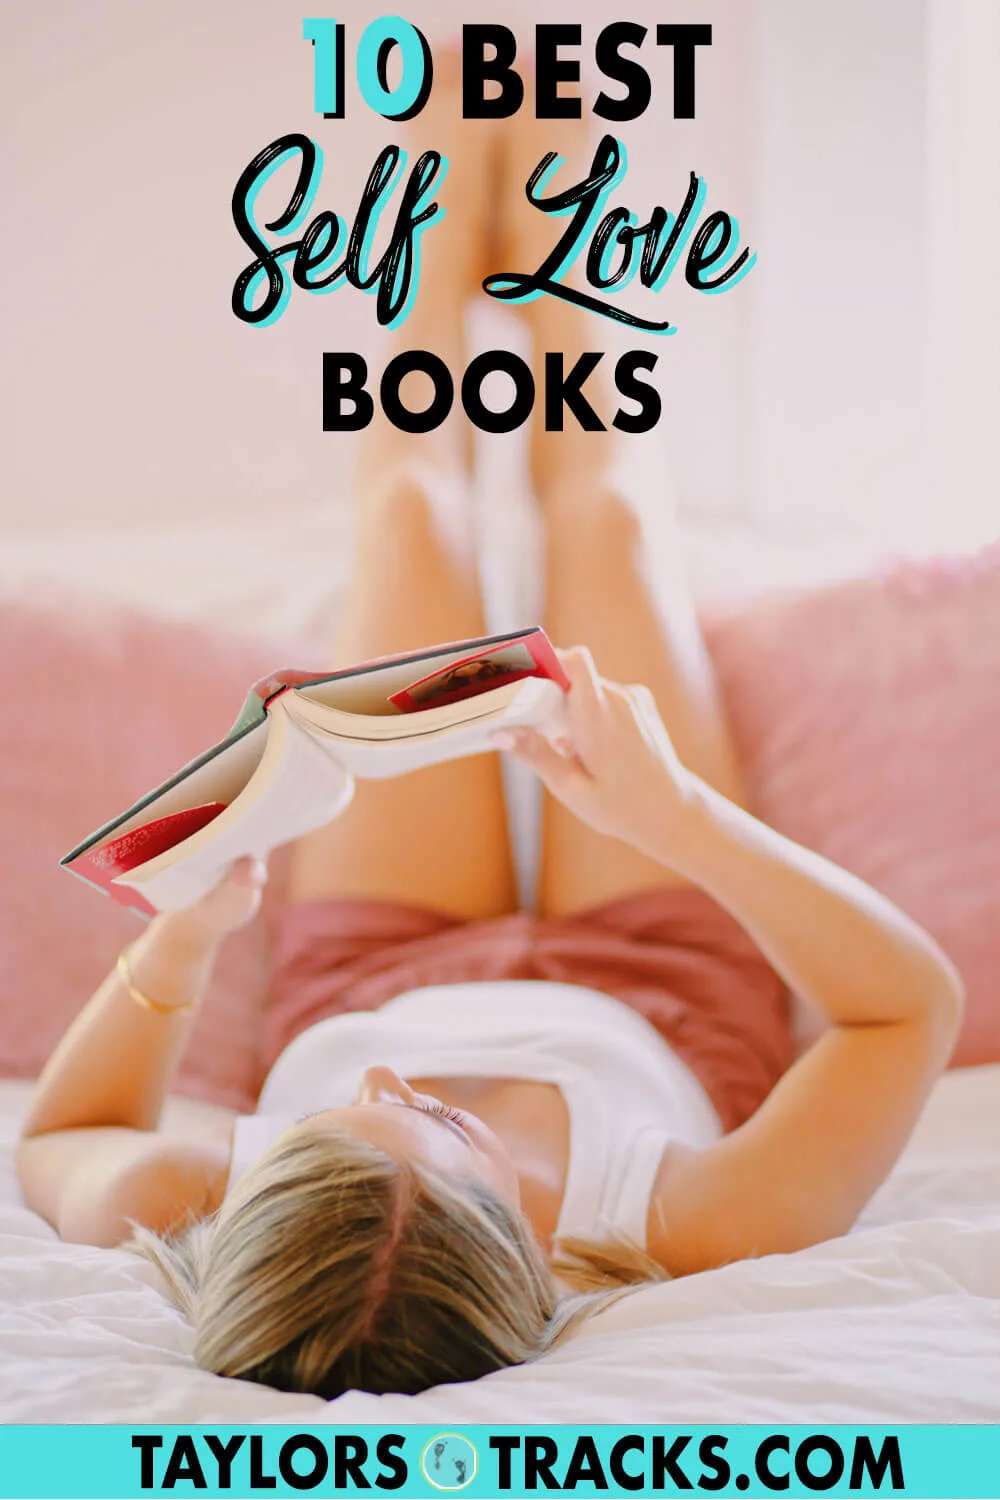 Self love starts with learning how you can love yourself. Grab one of these top self love books for women and dive into useful self love tips from the experts. Click to find your next great read!